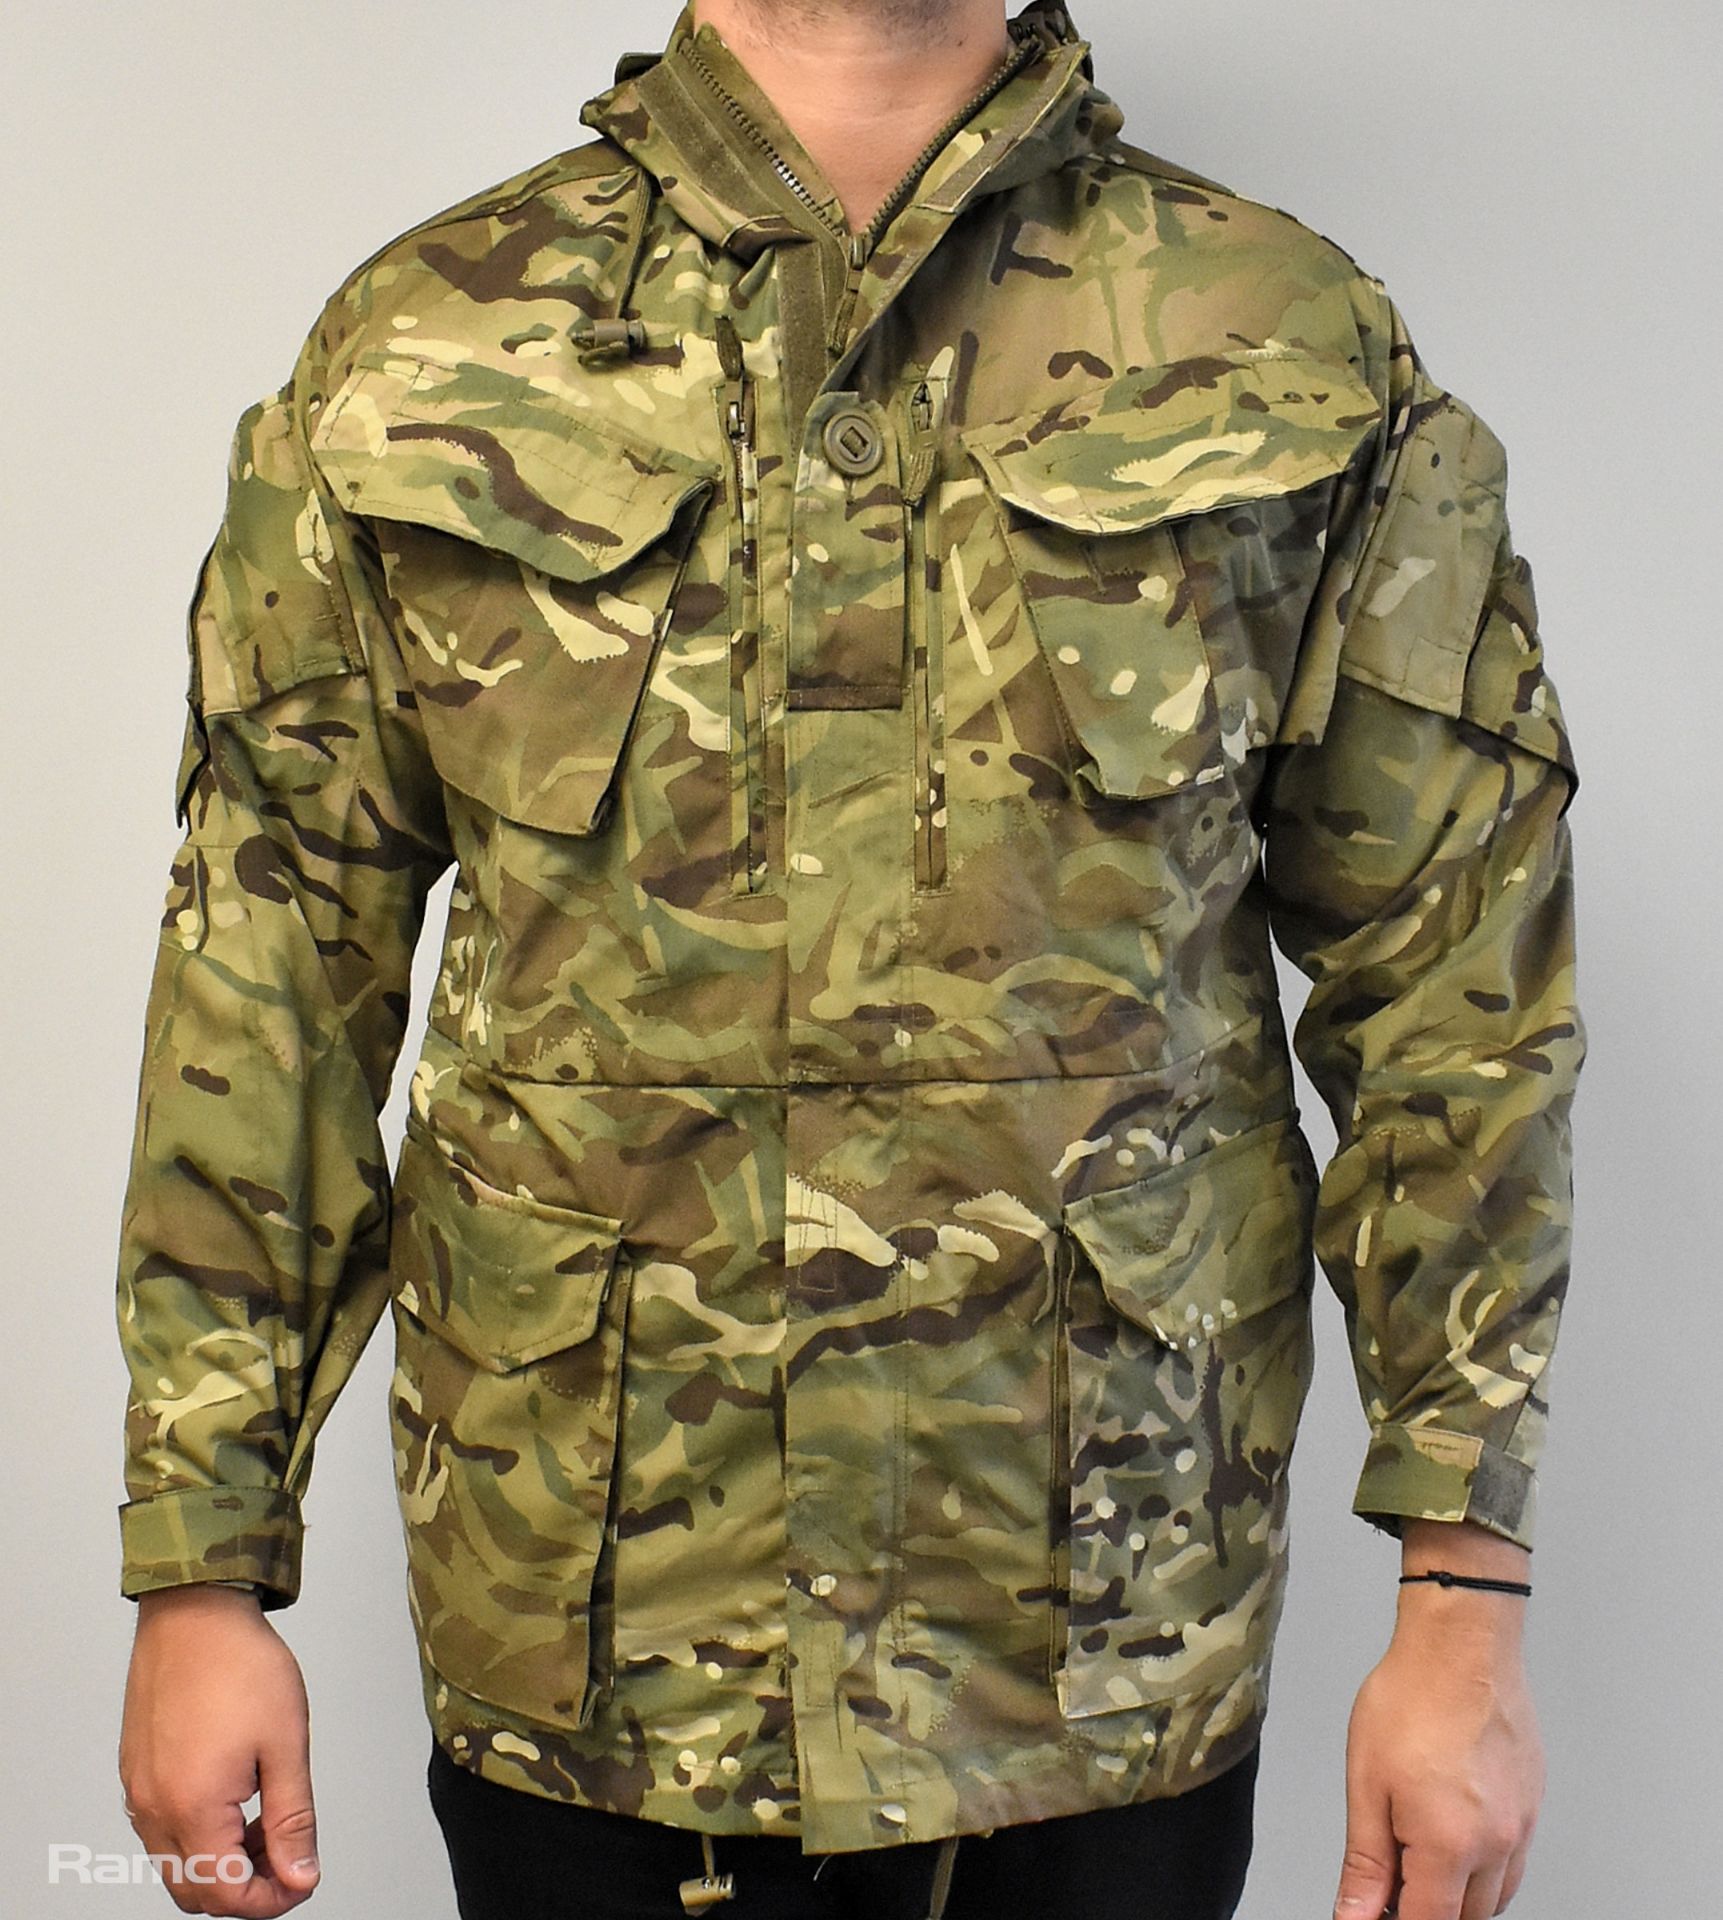 10x British Army MTP combat smocks 2 windproof - mixed grades and sizes